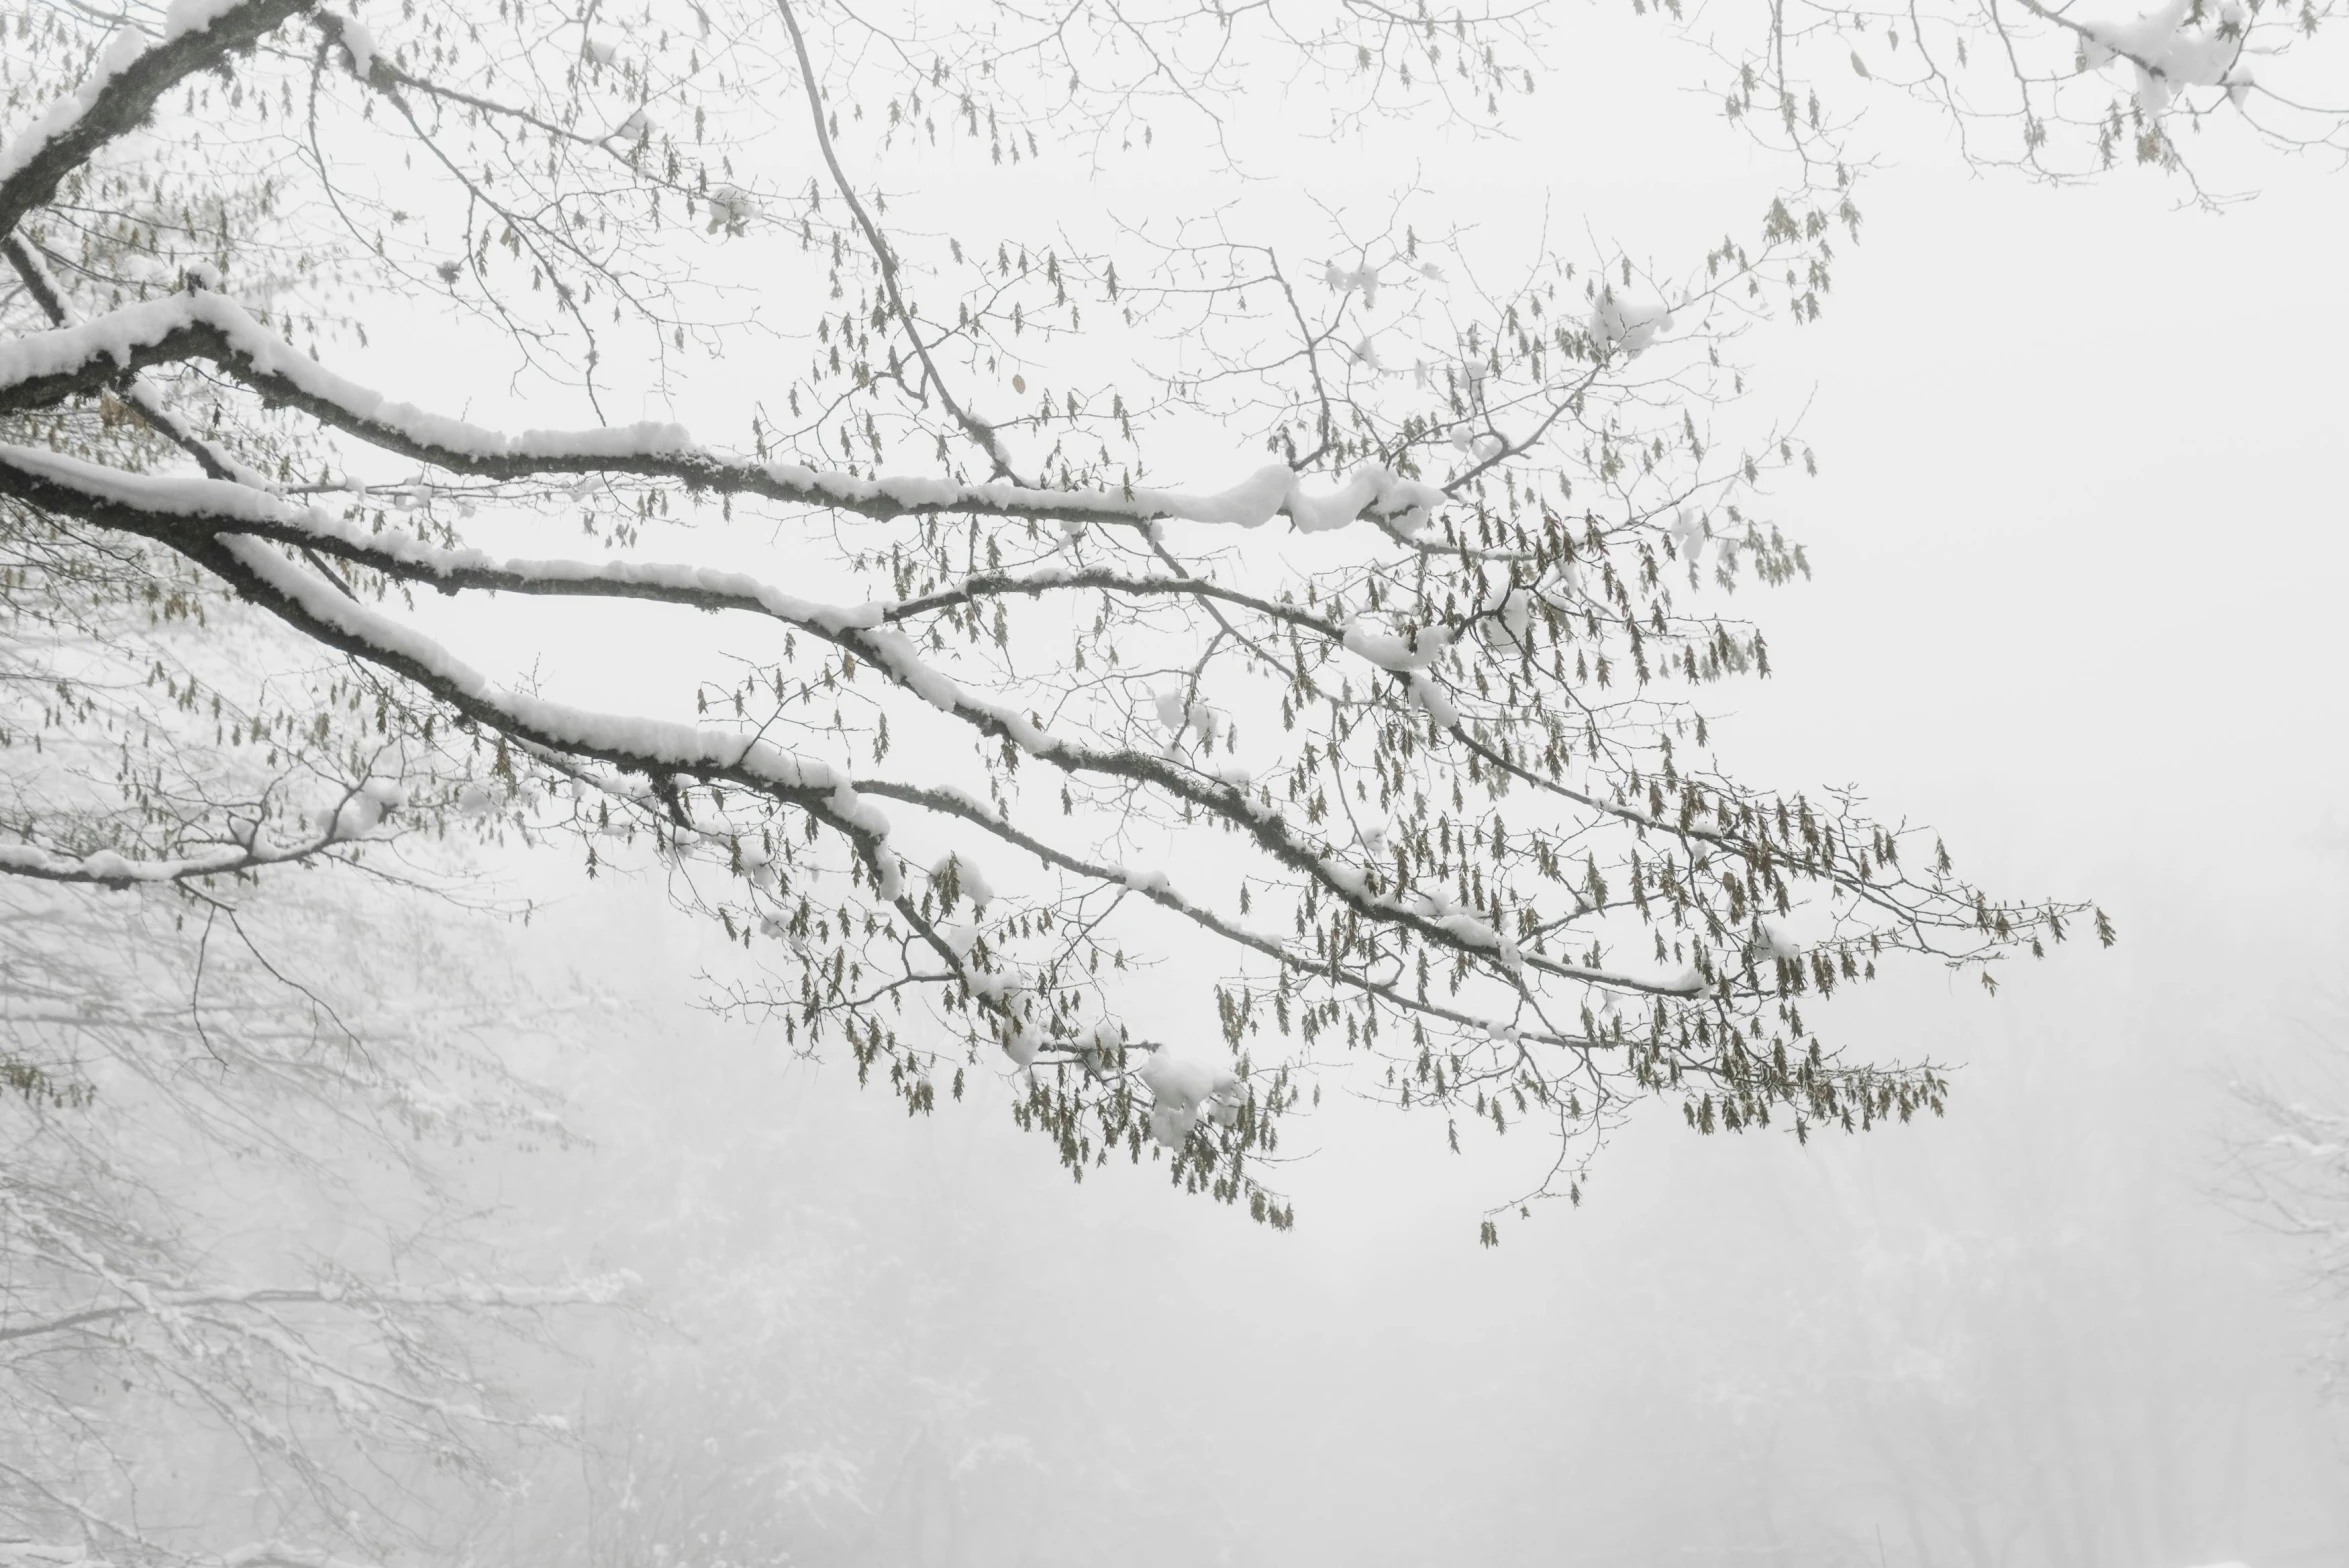 a couple of people that are walking in the snow, inspired by Pierre Pellegrini, magnolia leaves and stems, rinko kawauchi, tree branches intertwine limbs, fine art print